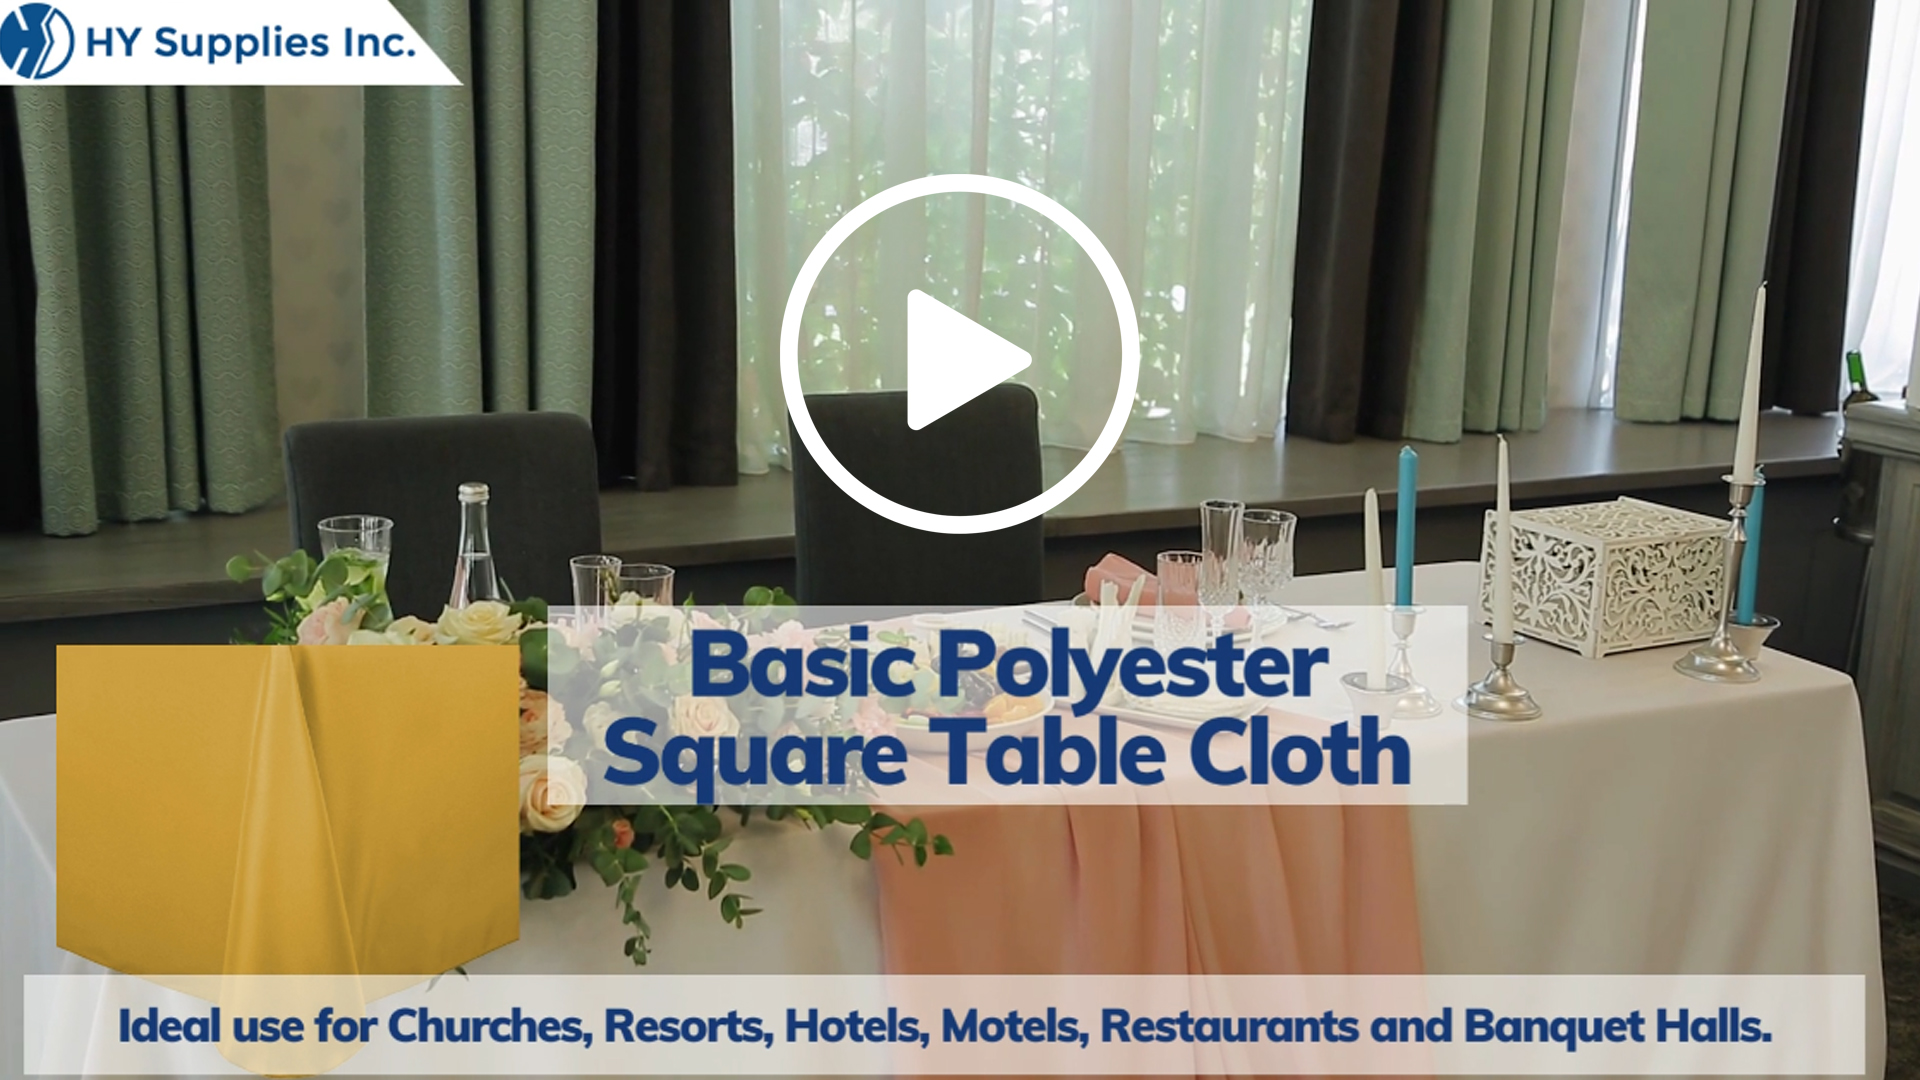 Basic Polyester Square Table Cloth